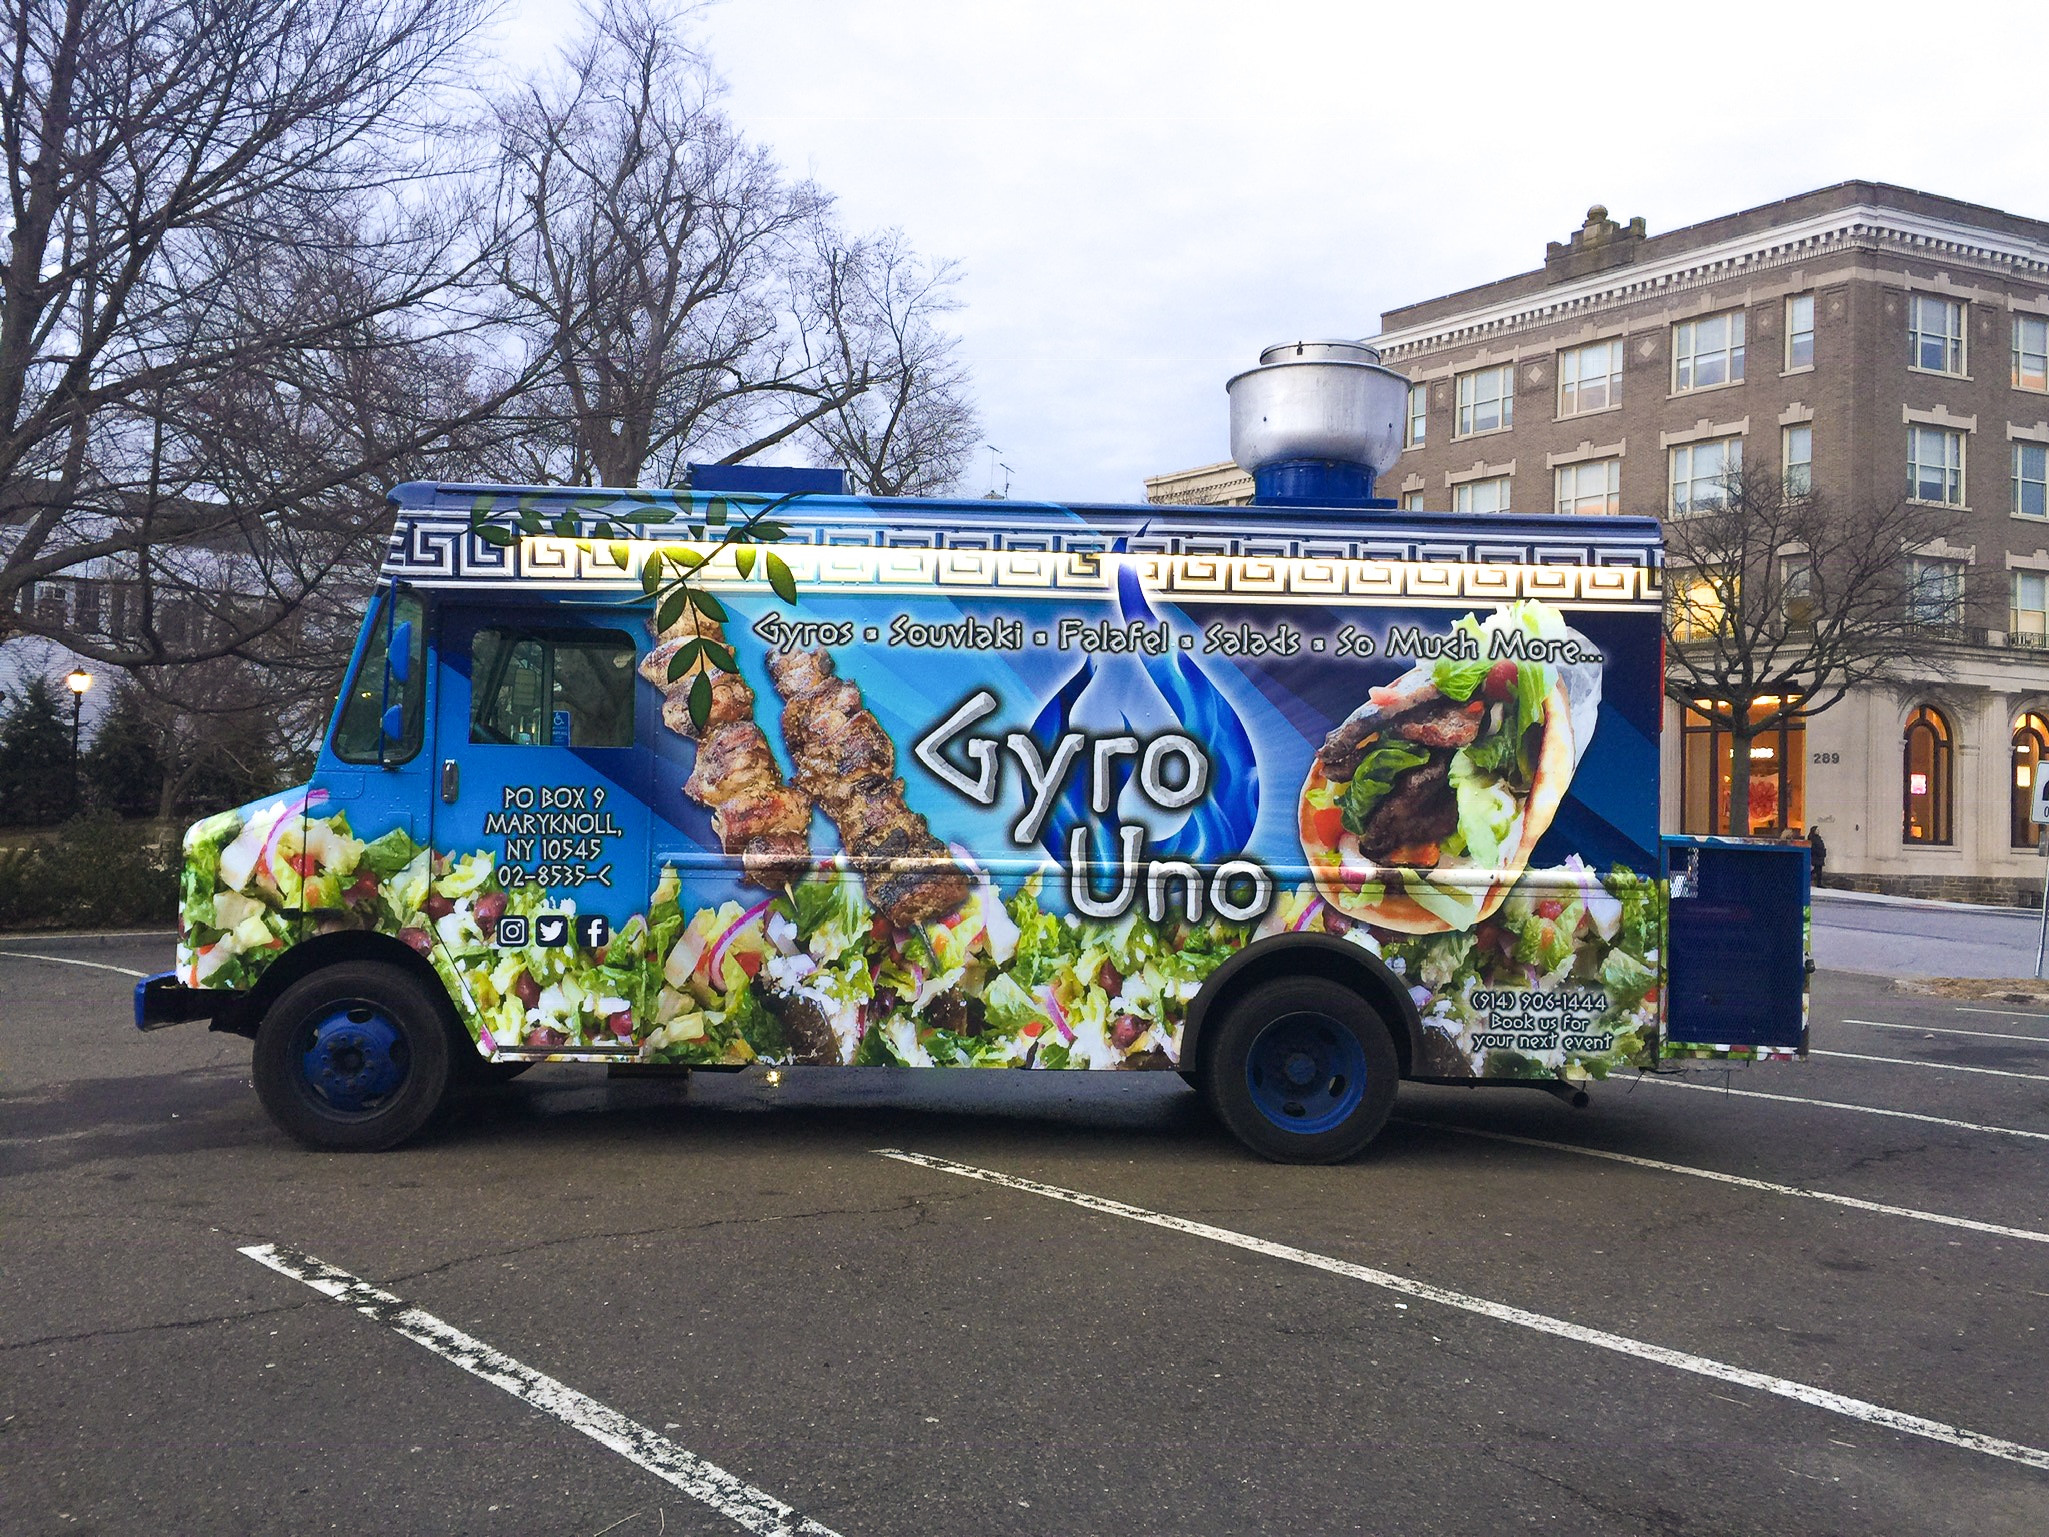 Gyro Uno Food Truck Catering